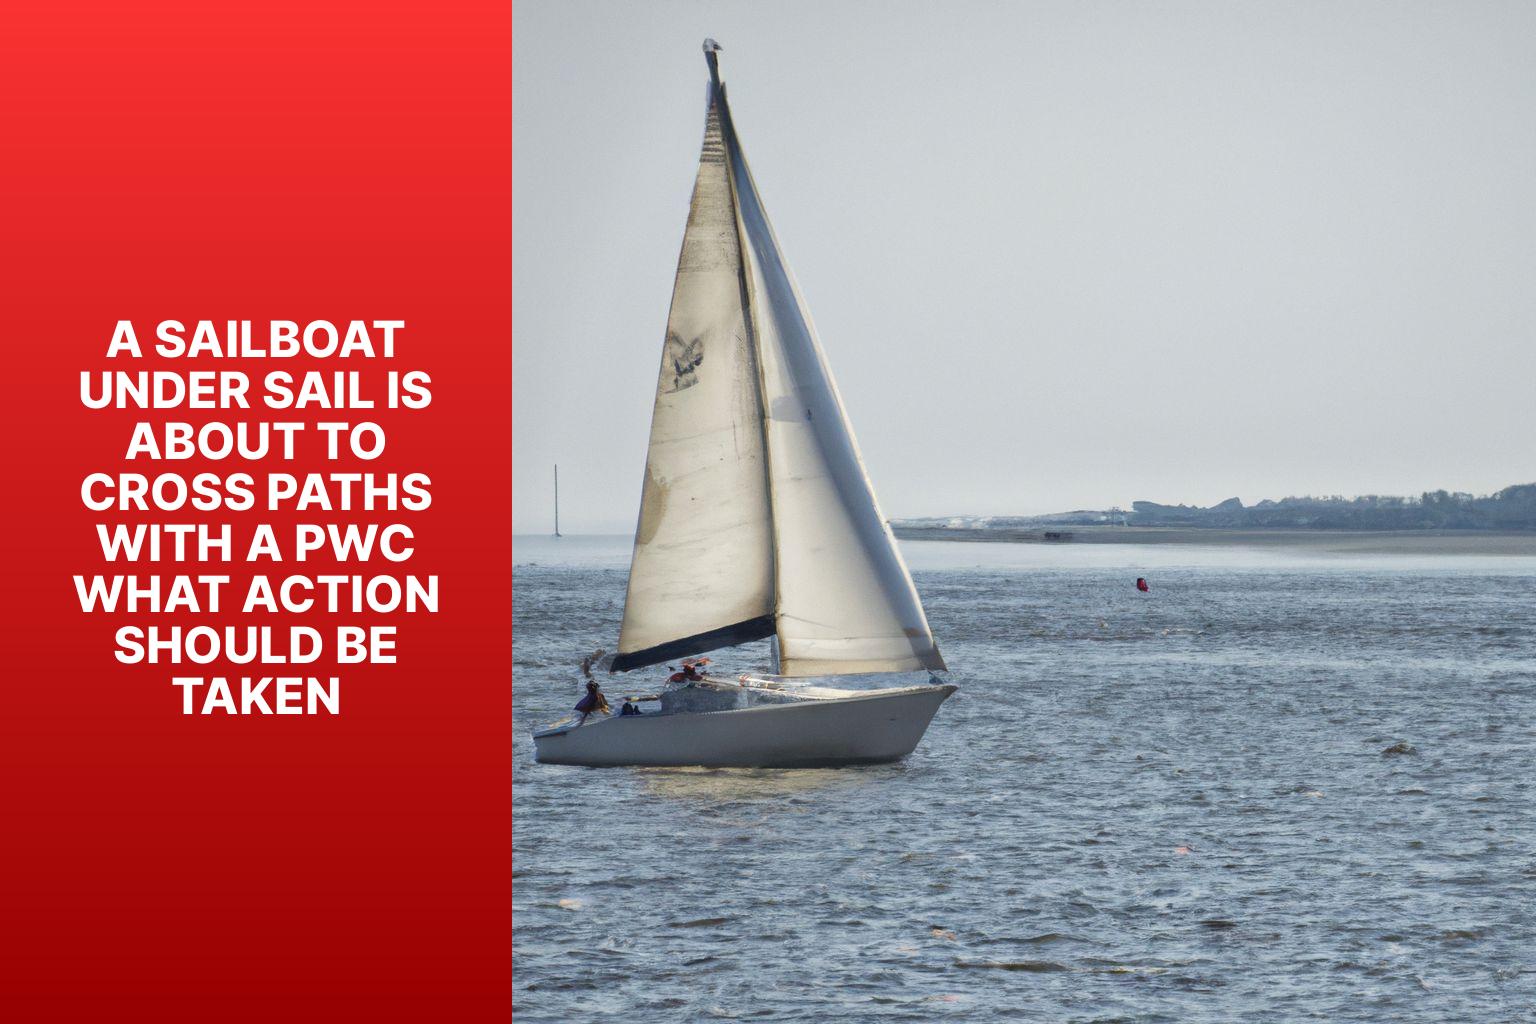 Safety Tips: How to Navigate when a Sailboat Crosses Paths with a PWC